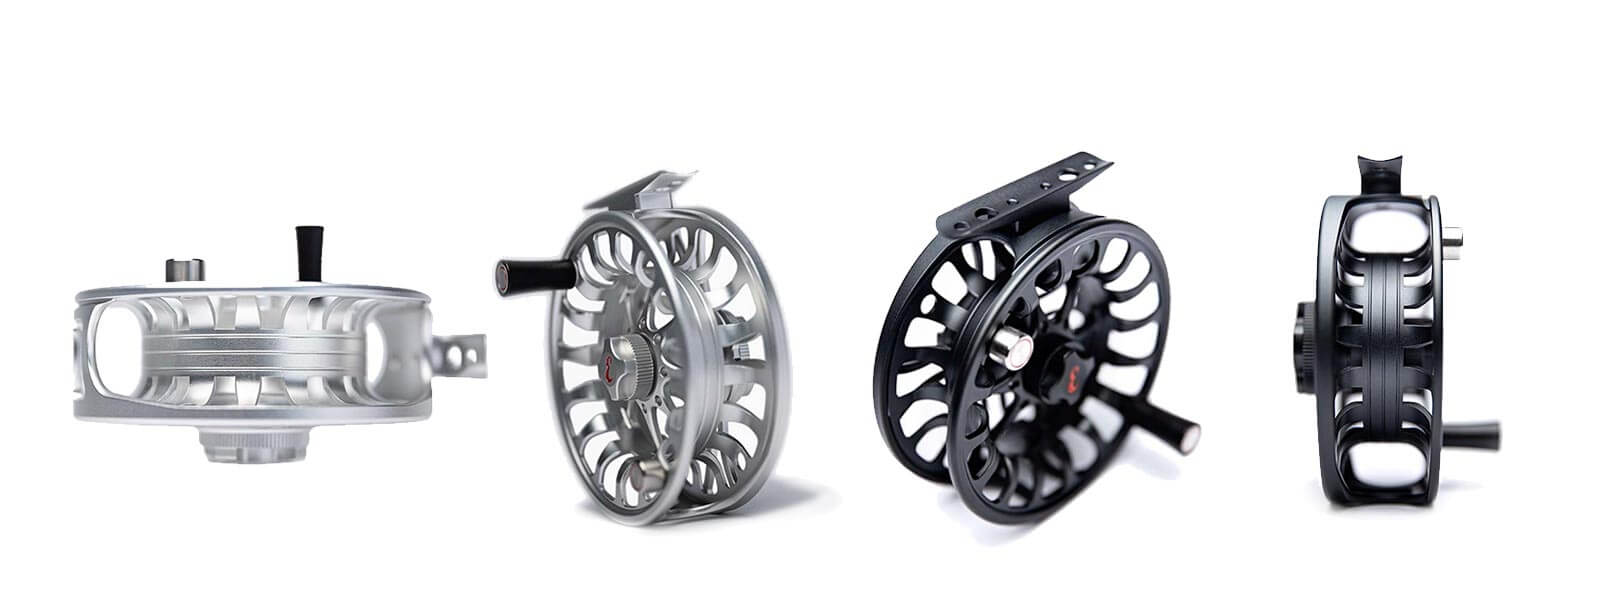 Fly reels Voted "Best of the Best" by Field & Stream Magazine our Backcountry fly reel is fully CNCFly Reels for fly fishing one of the very best fly fishing reels produced.